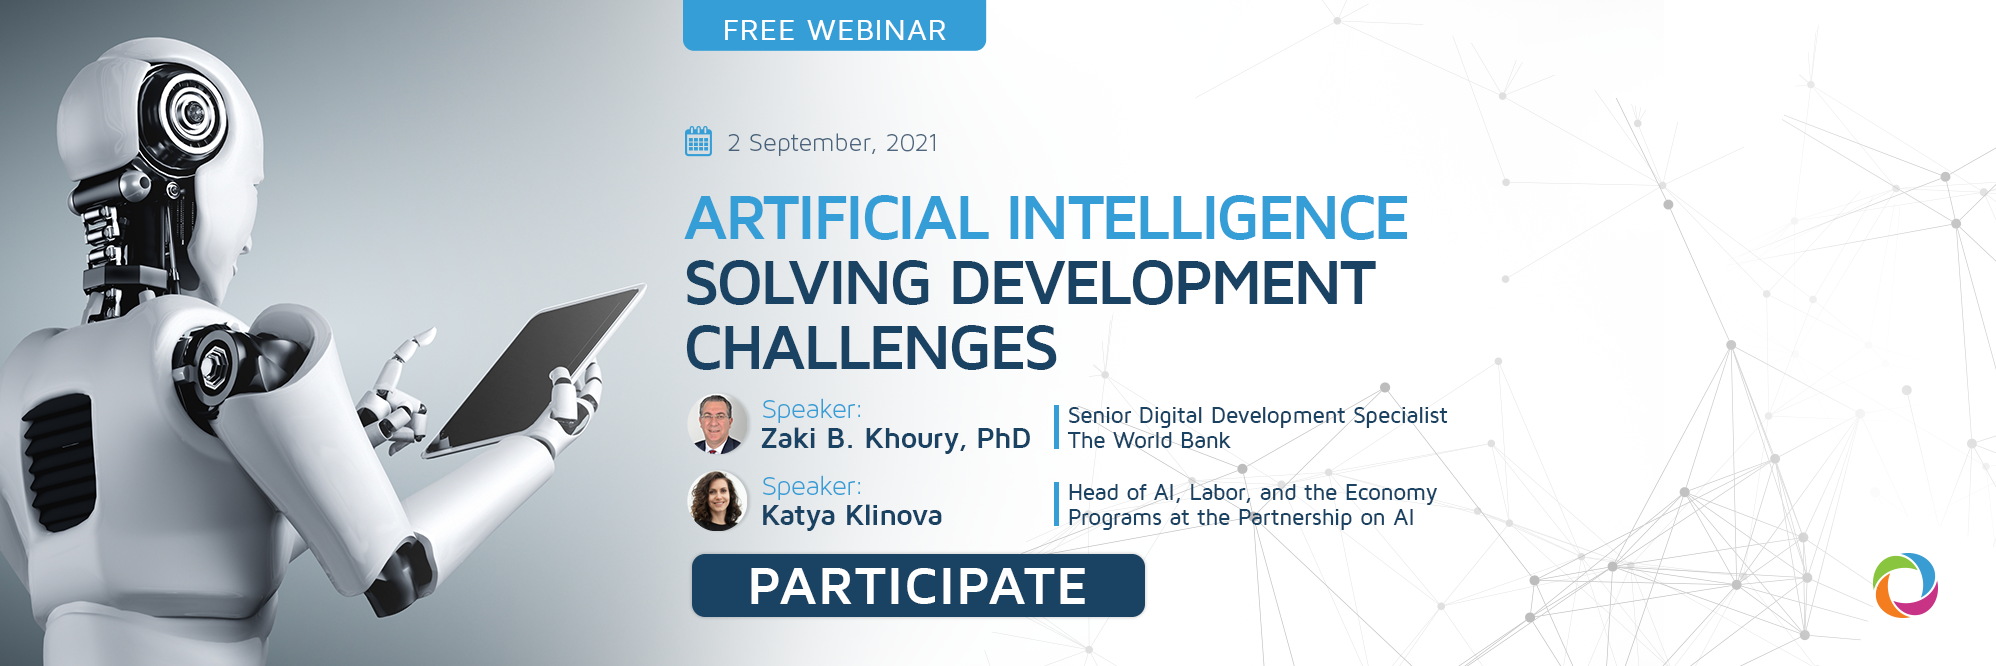 The Role of Artificial Intelligence in Solving Current Development Challenges: Opportunities and Risks | Webinar